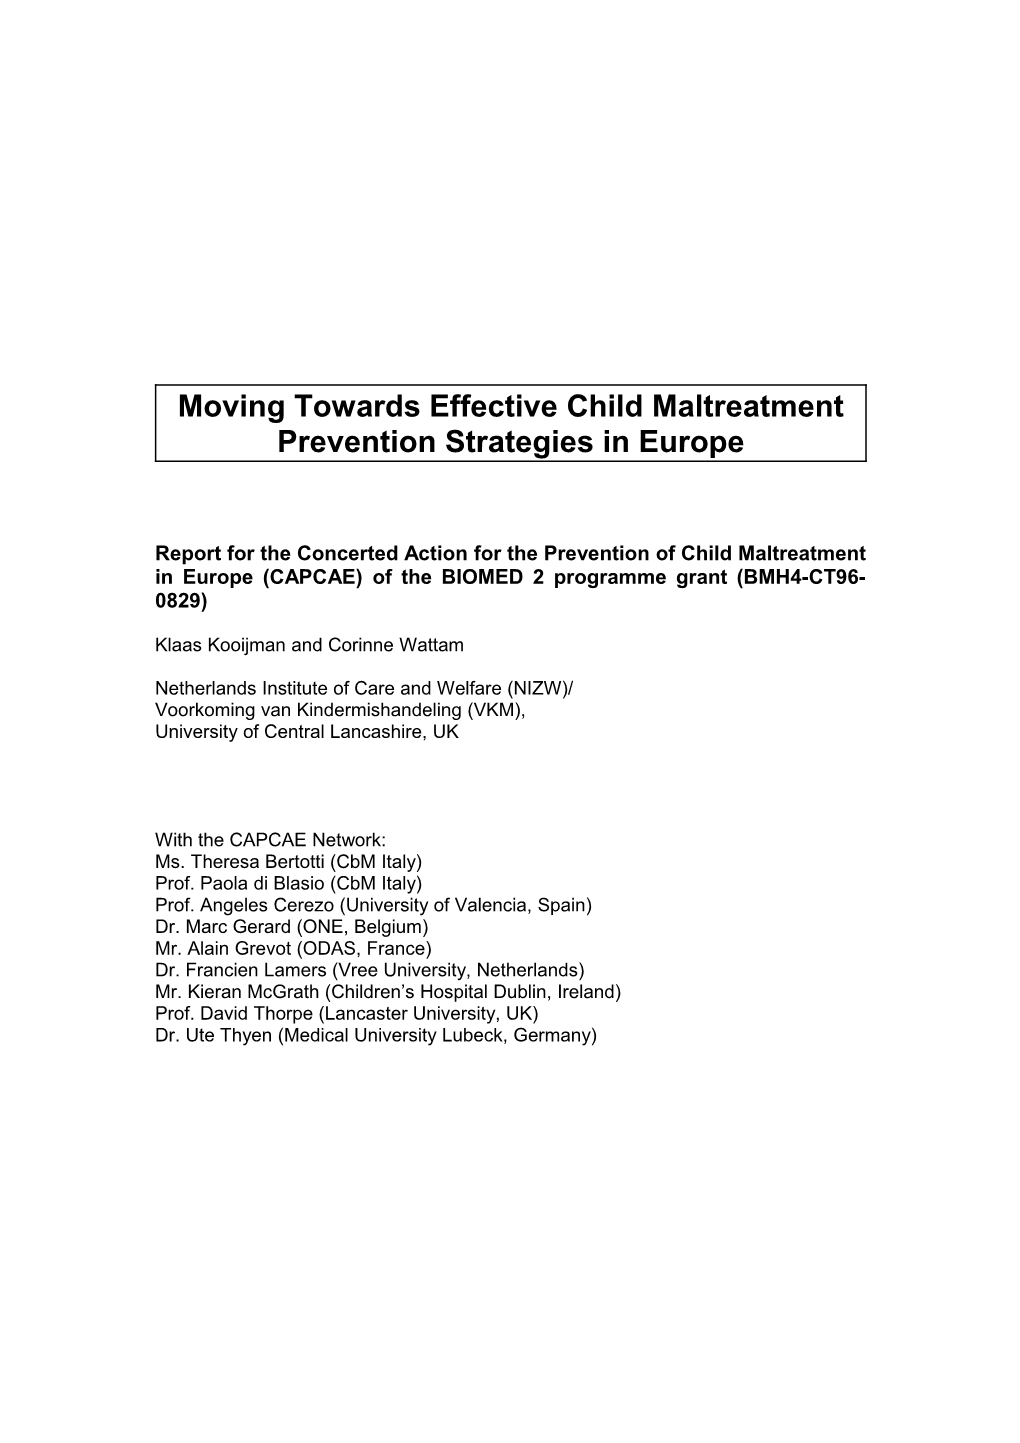 Moving Towards Effective Child Maltreatment Prevention Strategies in Europe